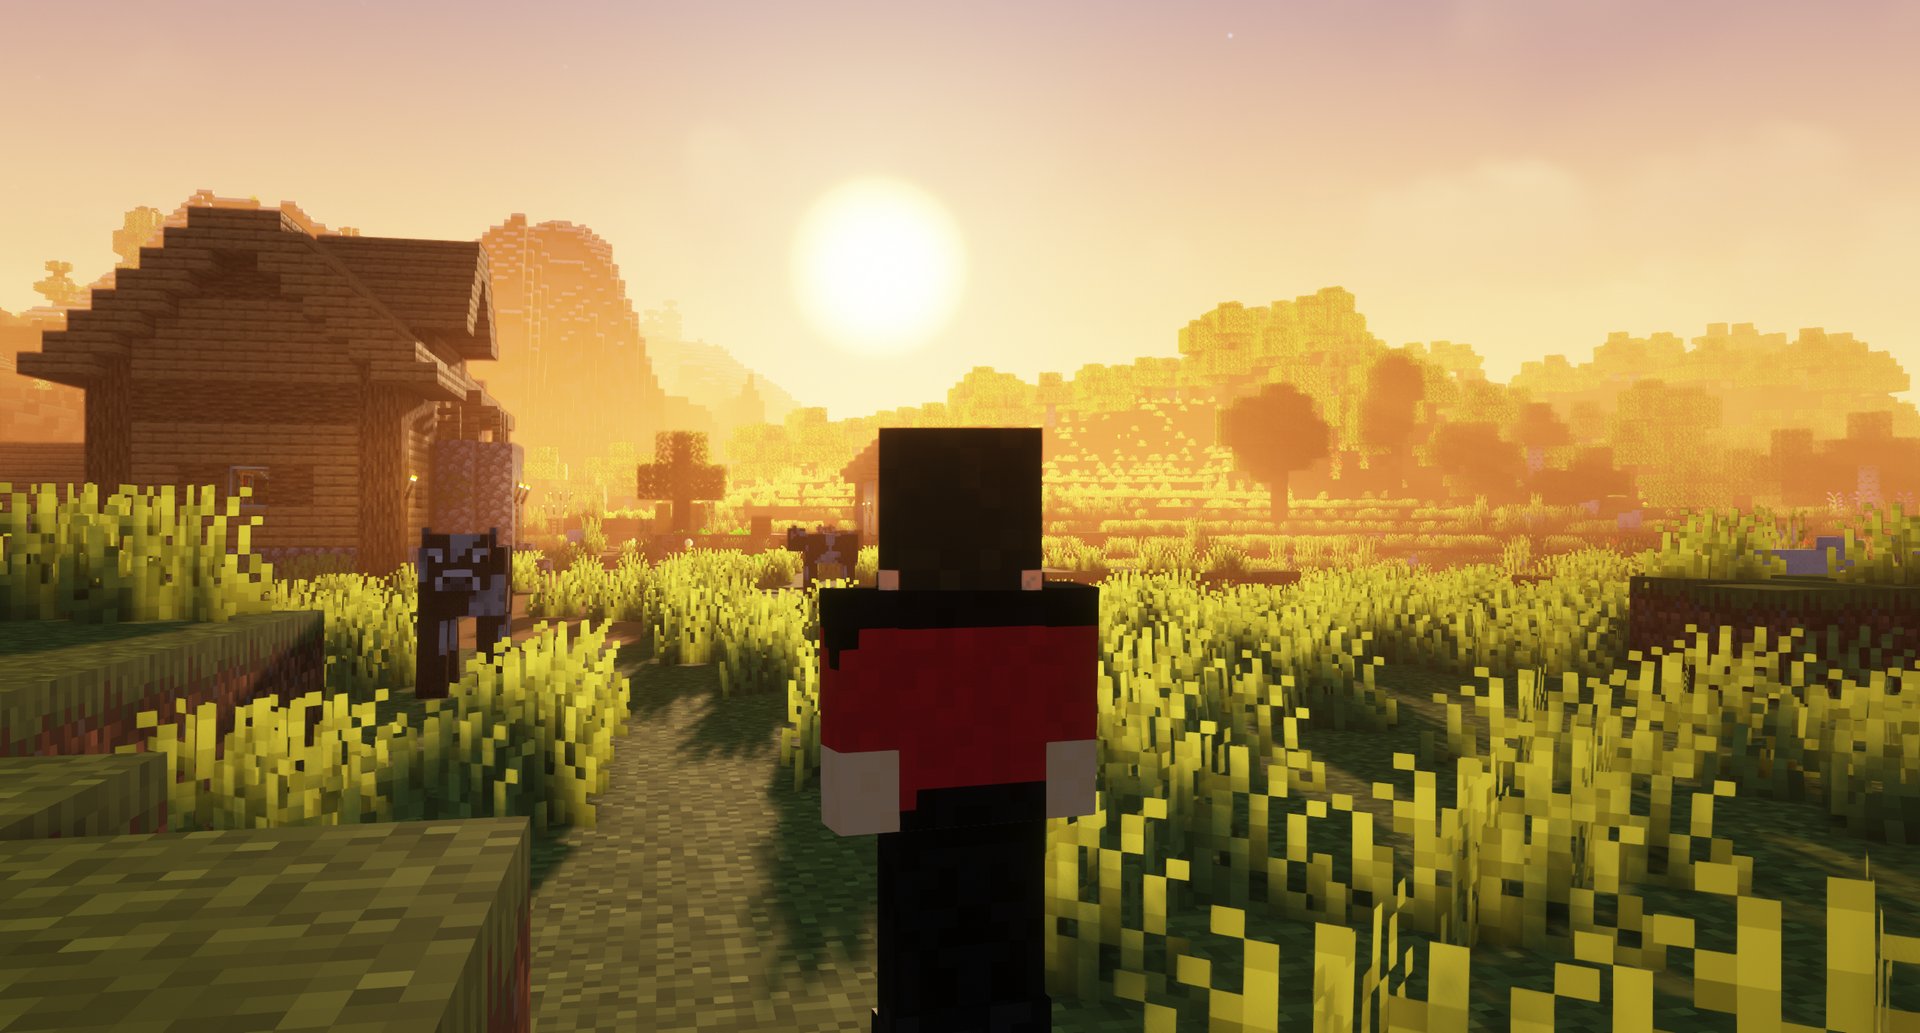 minecraft 1.12 shaders and forge